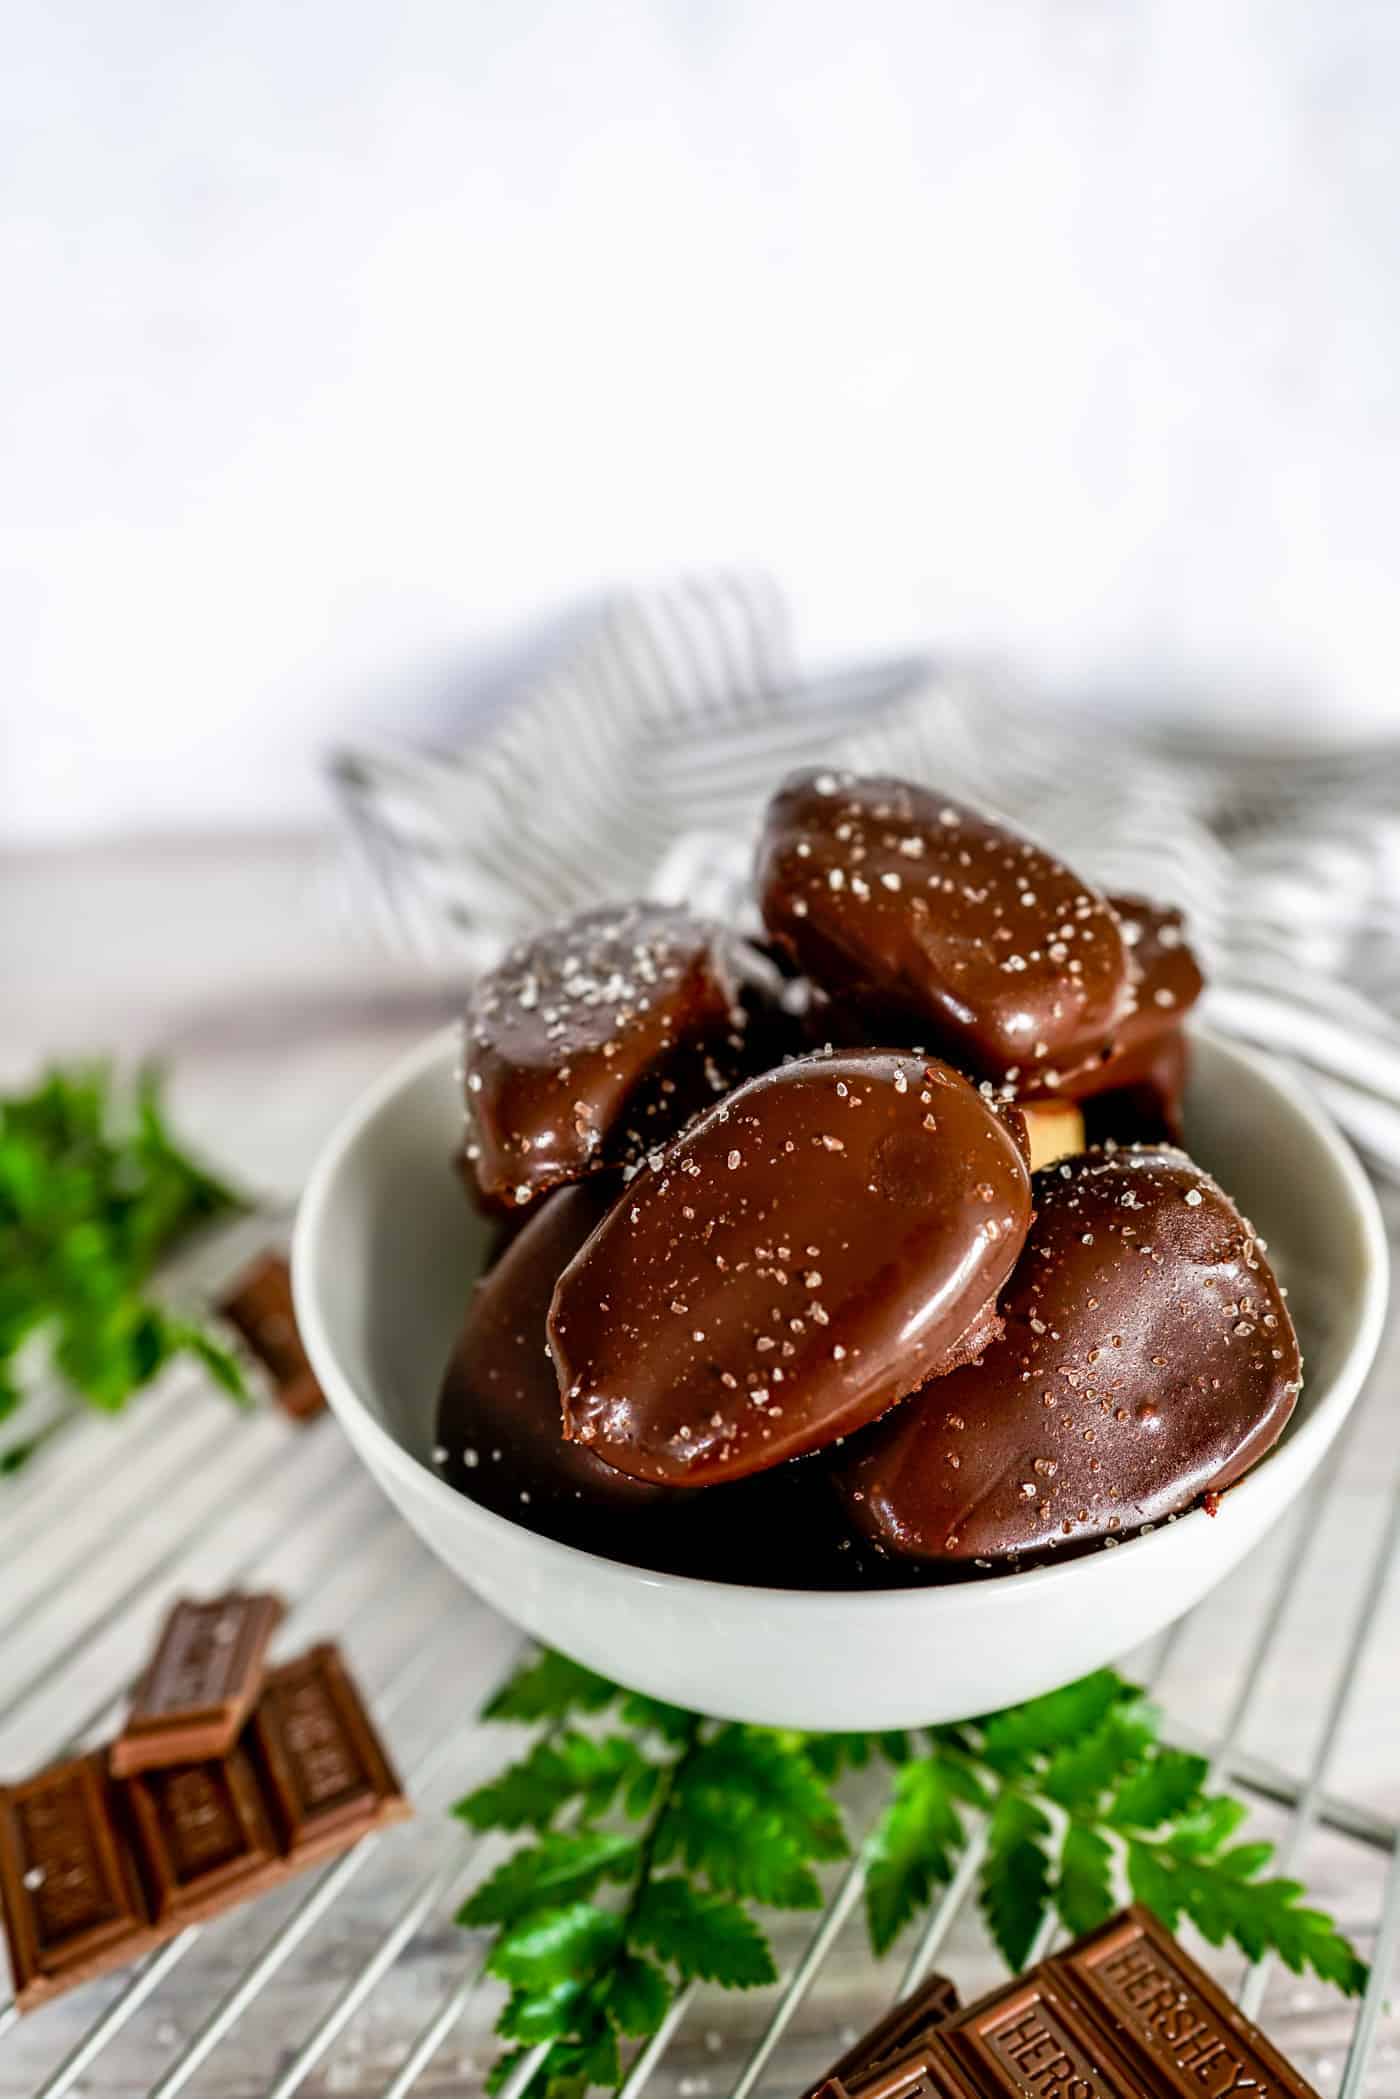 With just a few simply pantry ingredients, these homemade peanut butter eggs are just the sweet treat you need this Easter and beyond!  Give them a try and let us know what you think! 